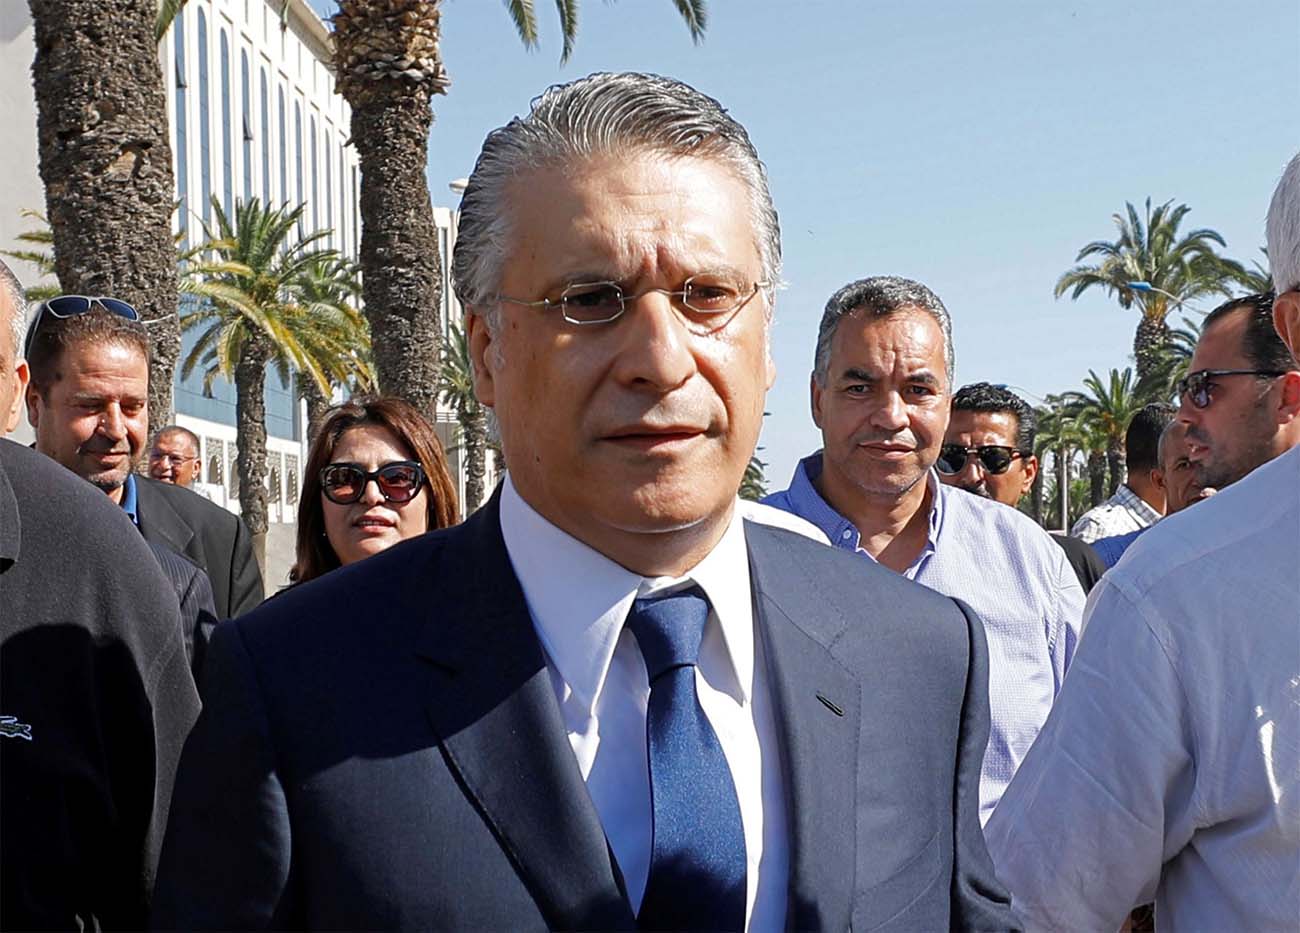 Karoui is the leader of the Heart of Tunisia party, the second largest party in parliament